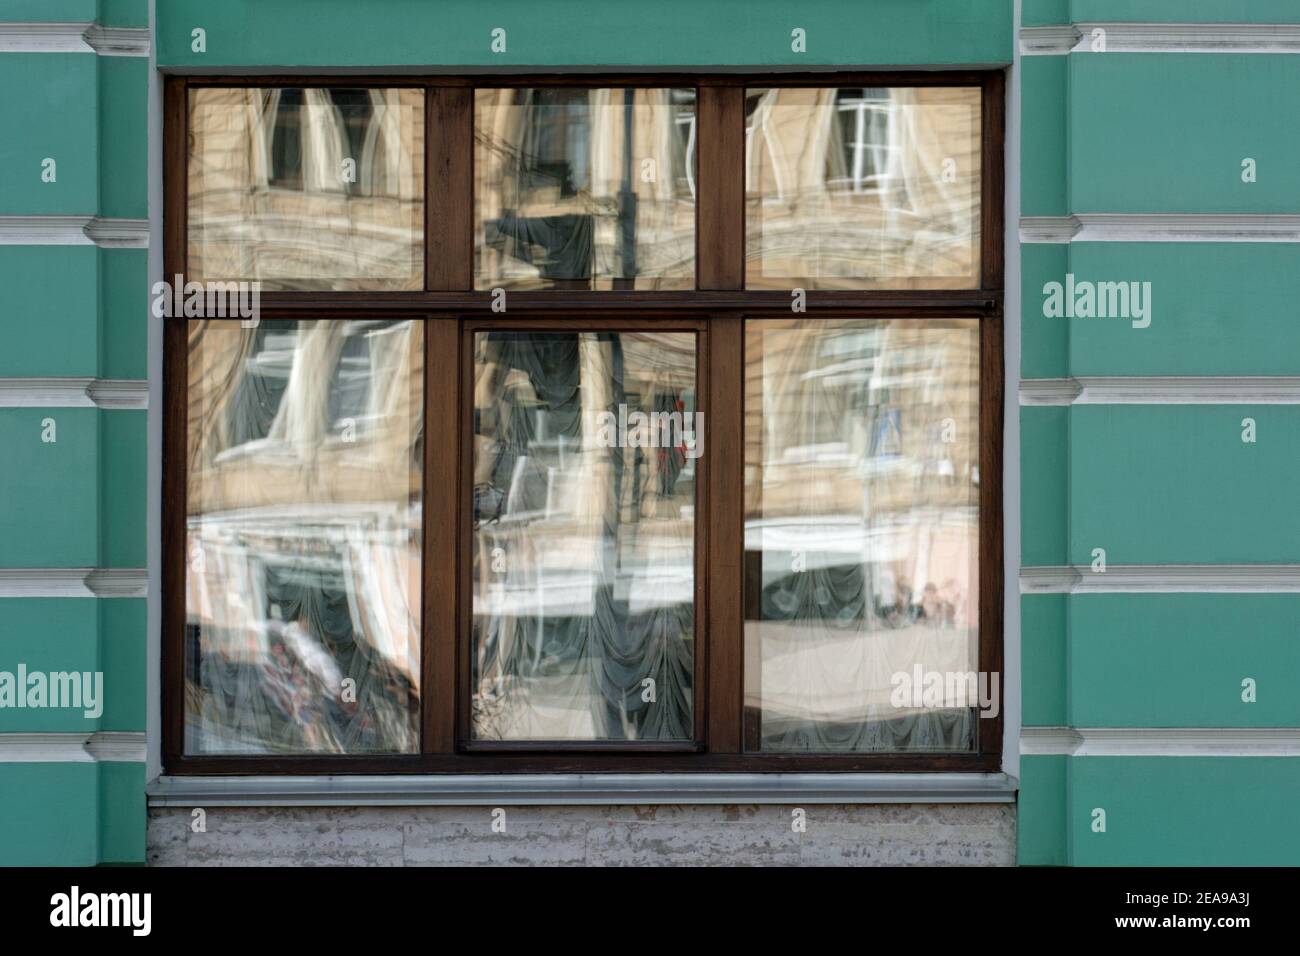 Reflections in the glass of a rectangular window against a green wall. From a series of windows of St. Petersburg. Stock Photo